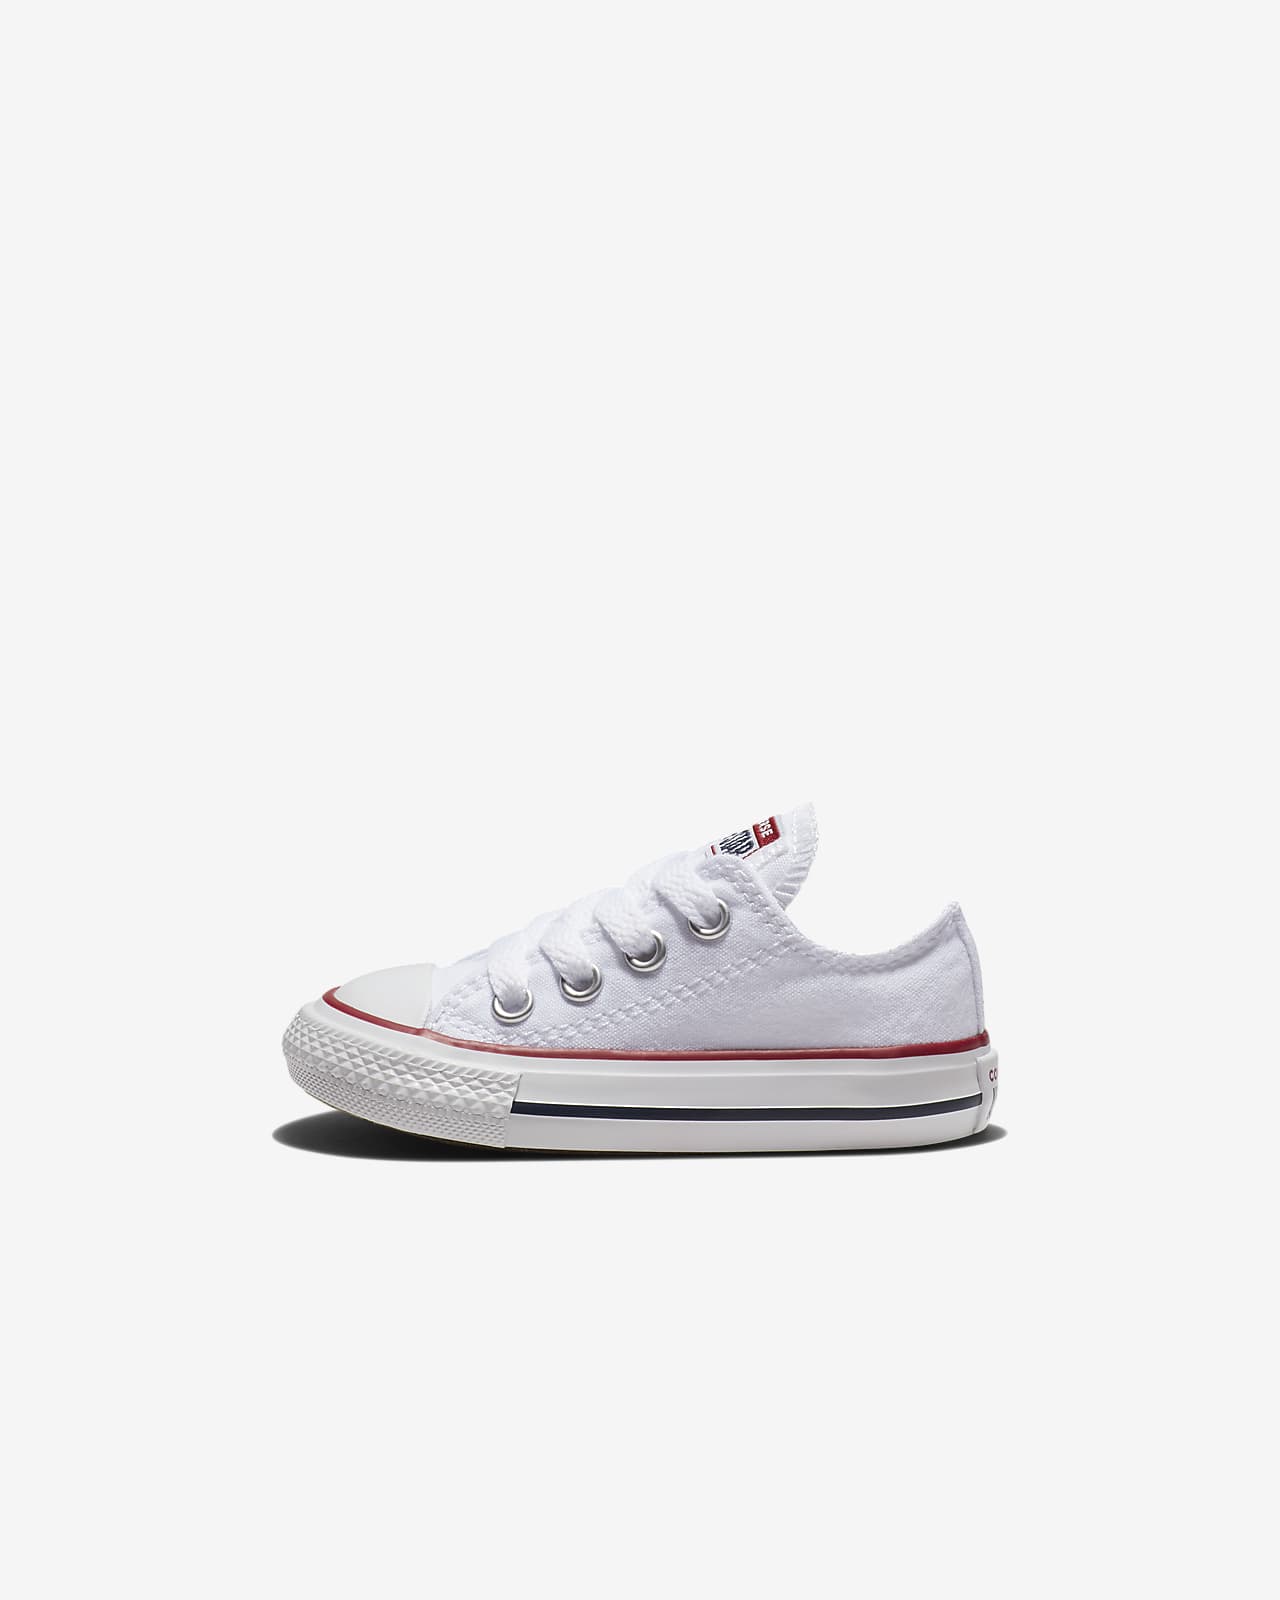 Converse Chuck Taylor All Star Low Top (2c-10c) Infant/Toddler Shoe